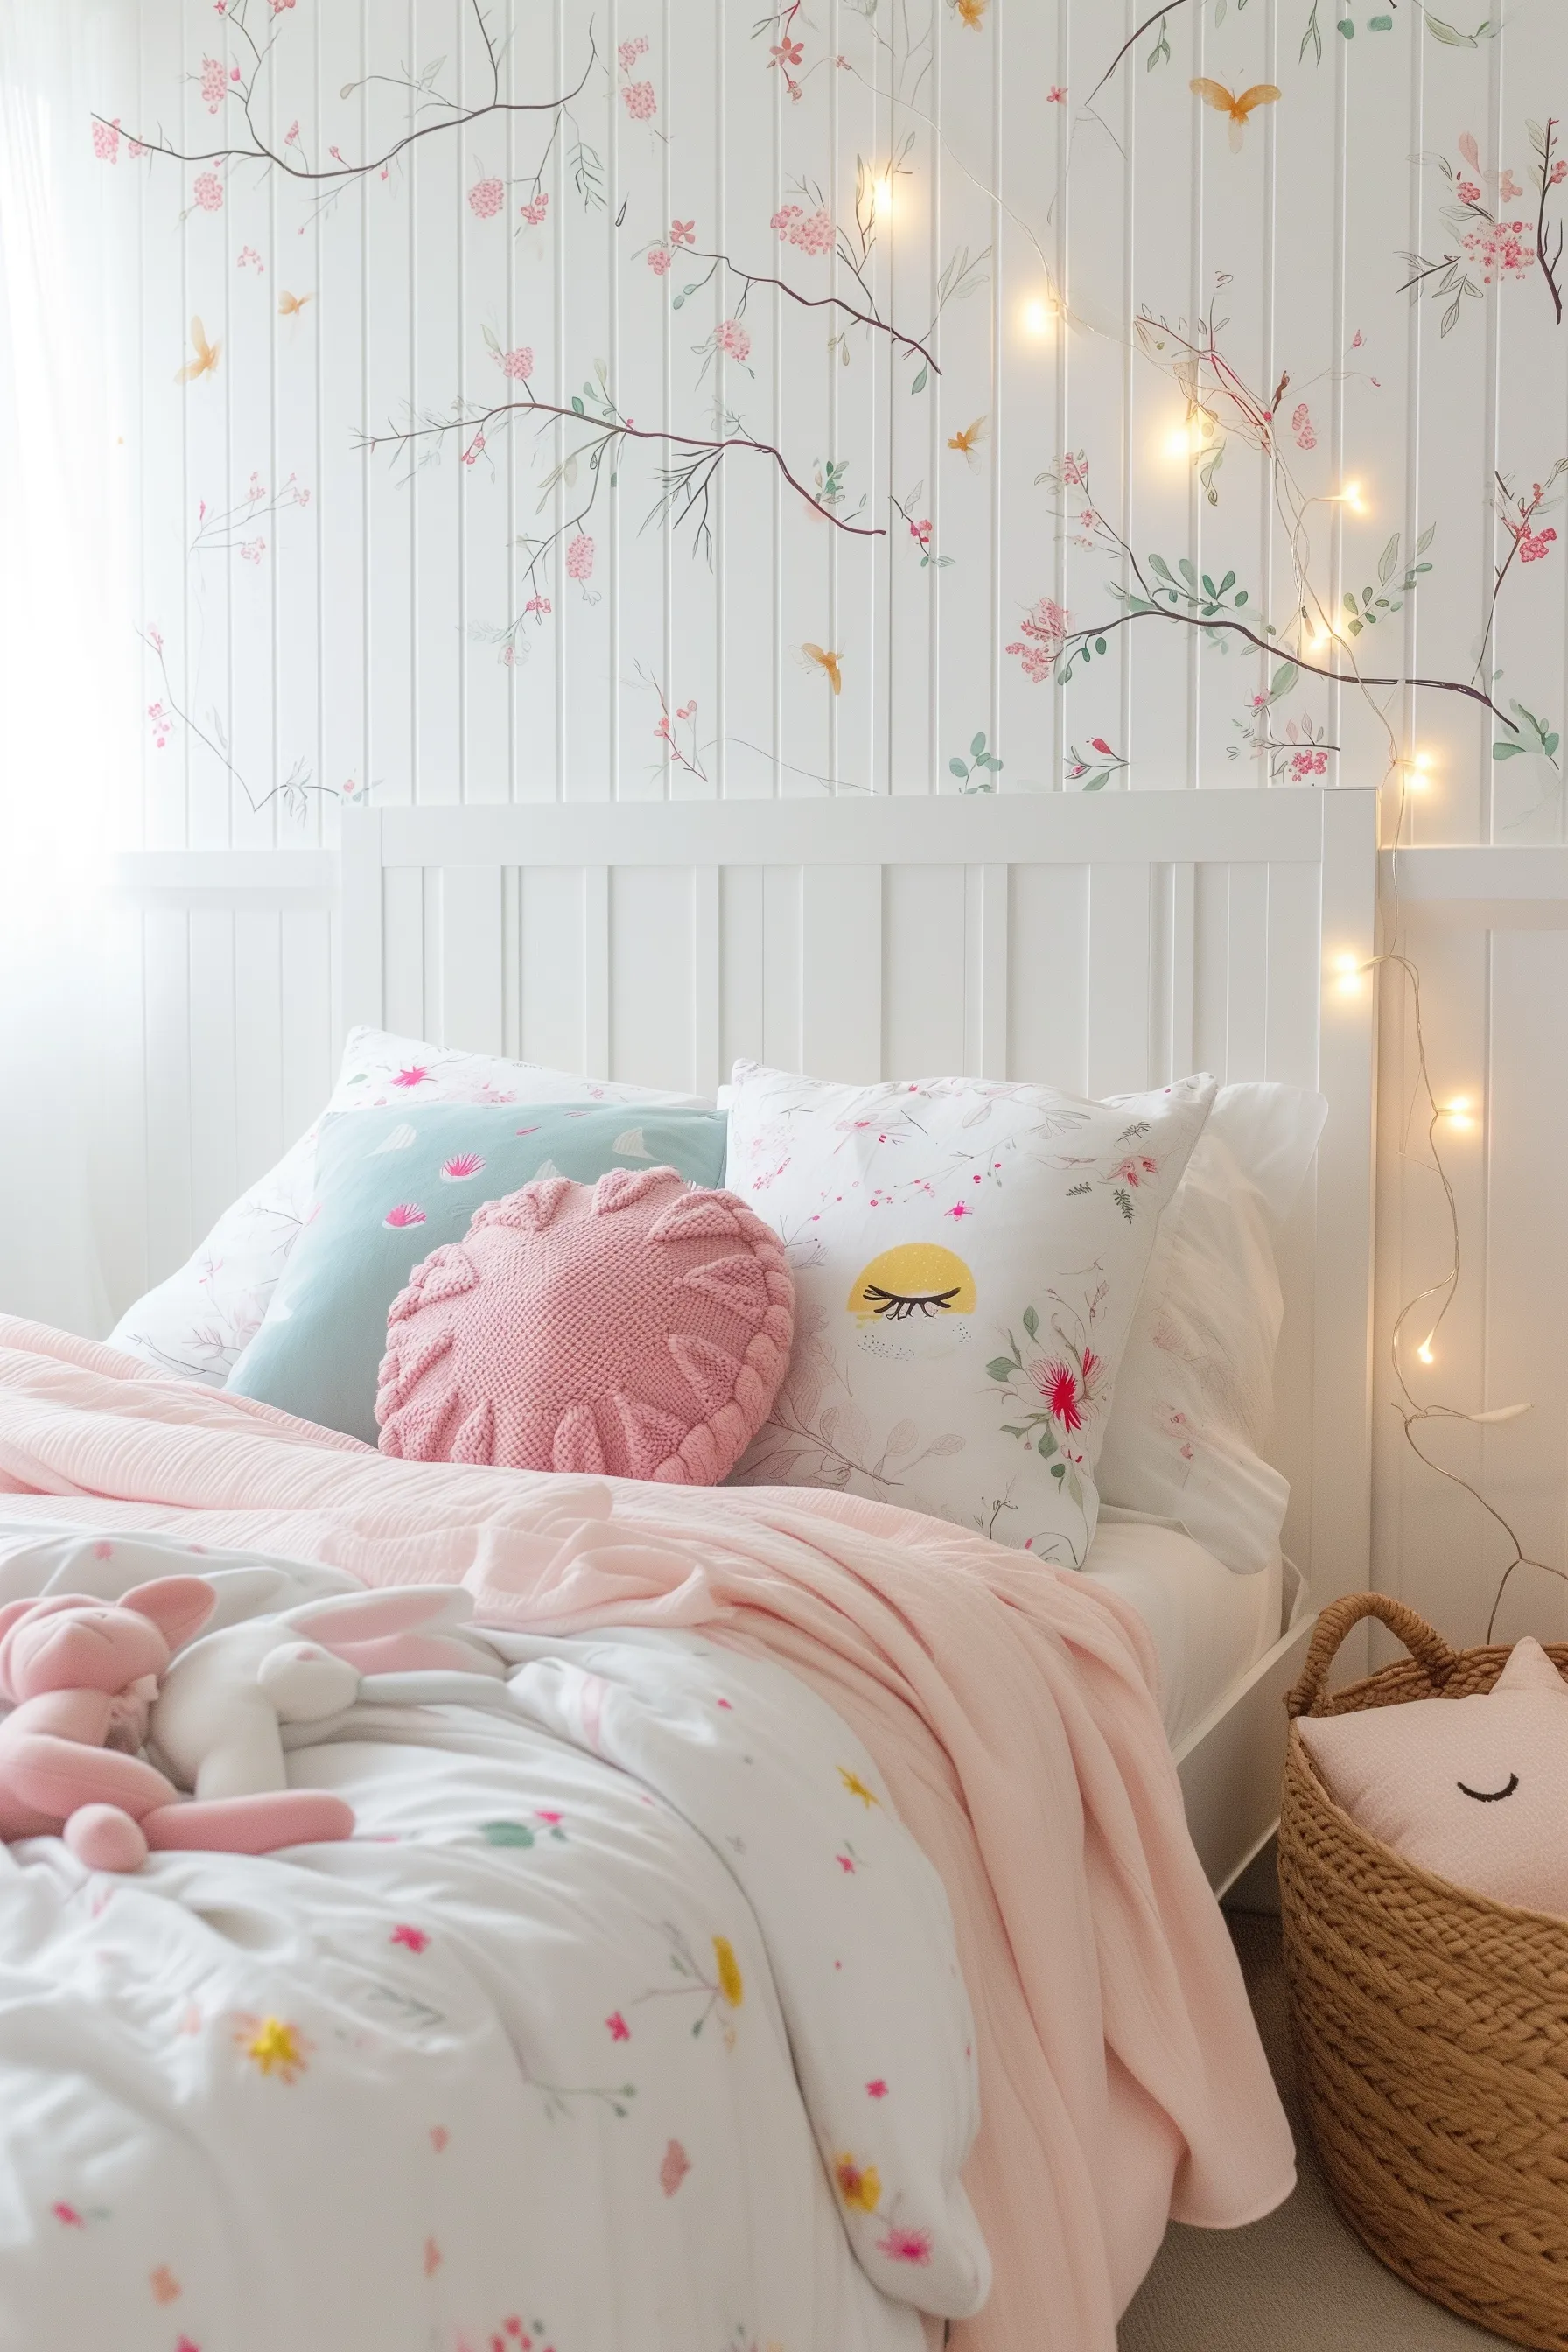 A white and pink bedroom with floral patterns